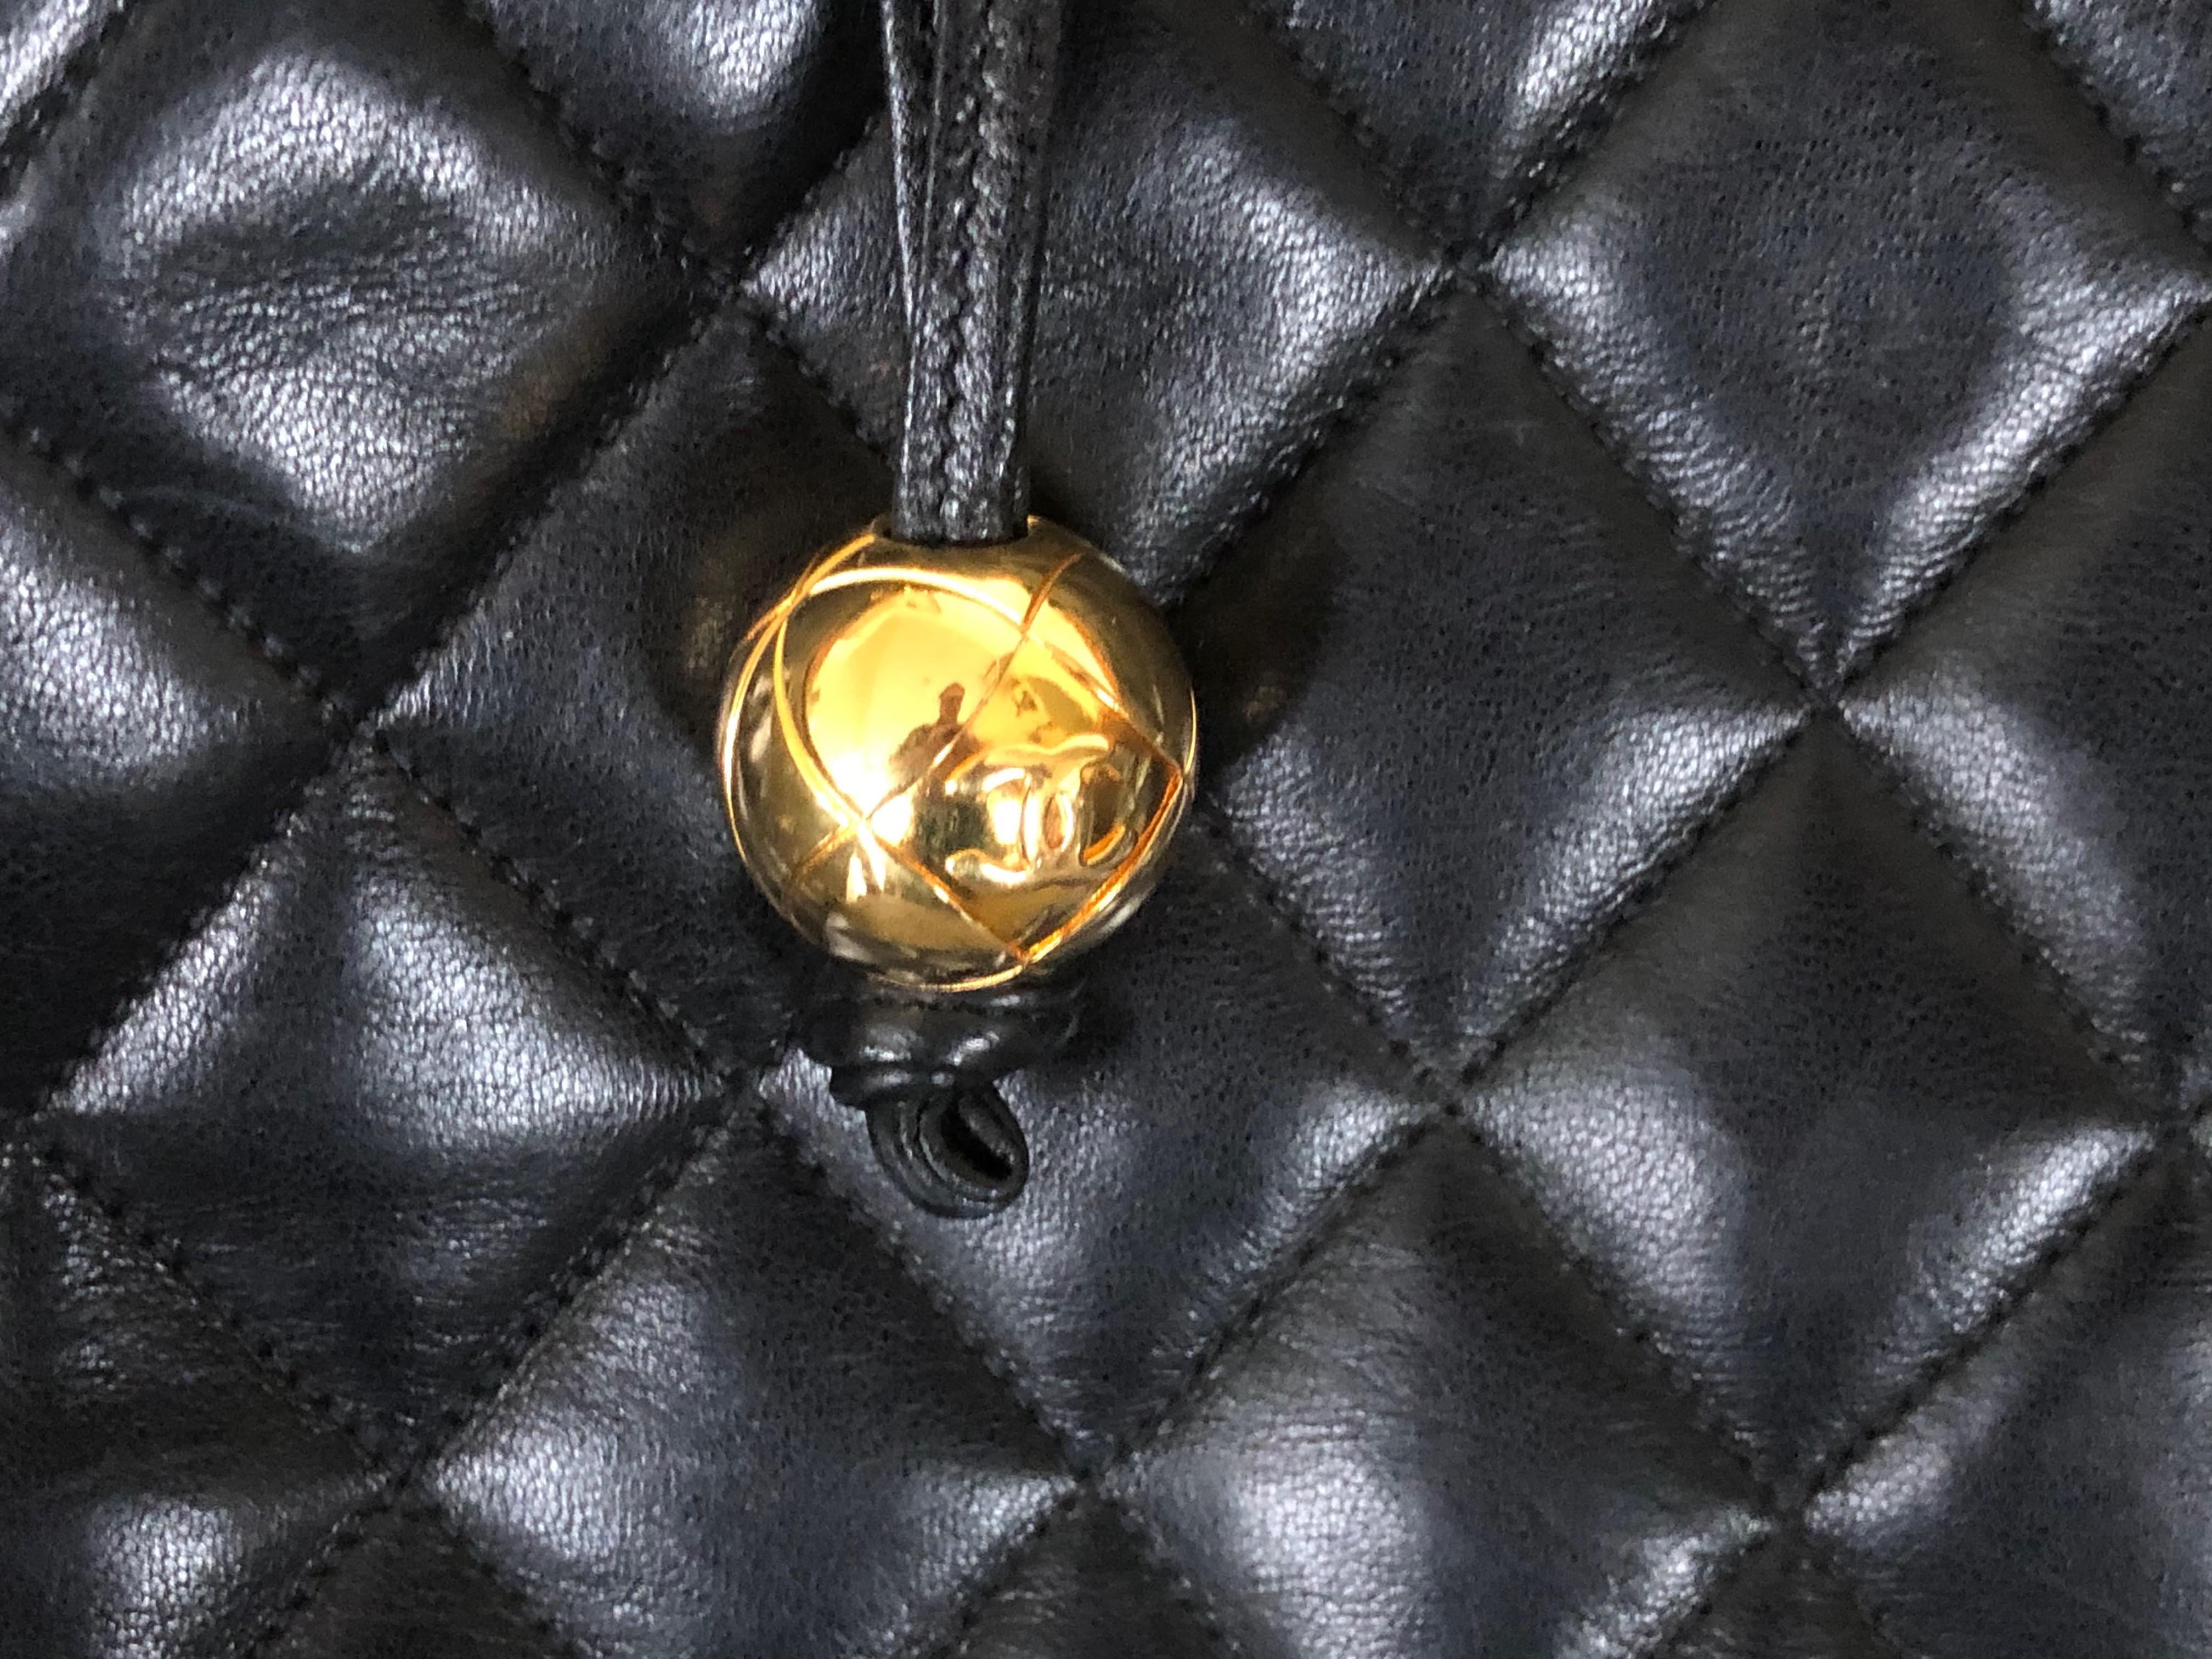 Chanel Large Black Leather Shoulder Bag with Gold Hardware and Quilted Details  In Excellent Condition For Sale In Cloverdale, CA